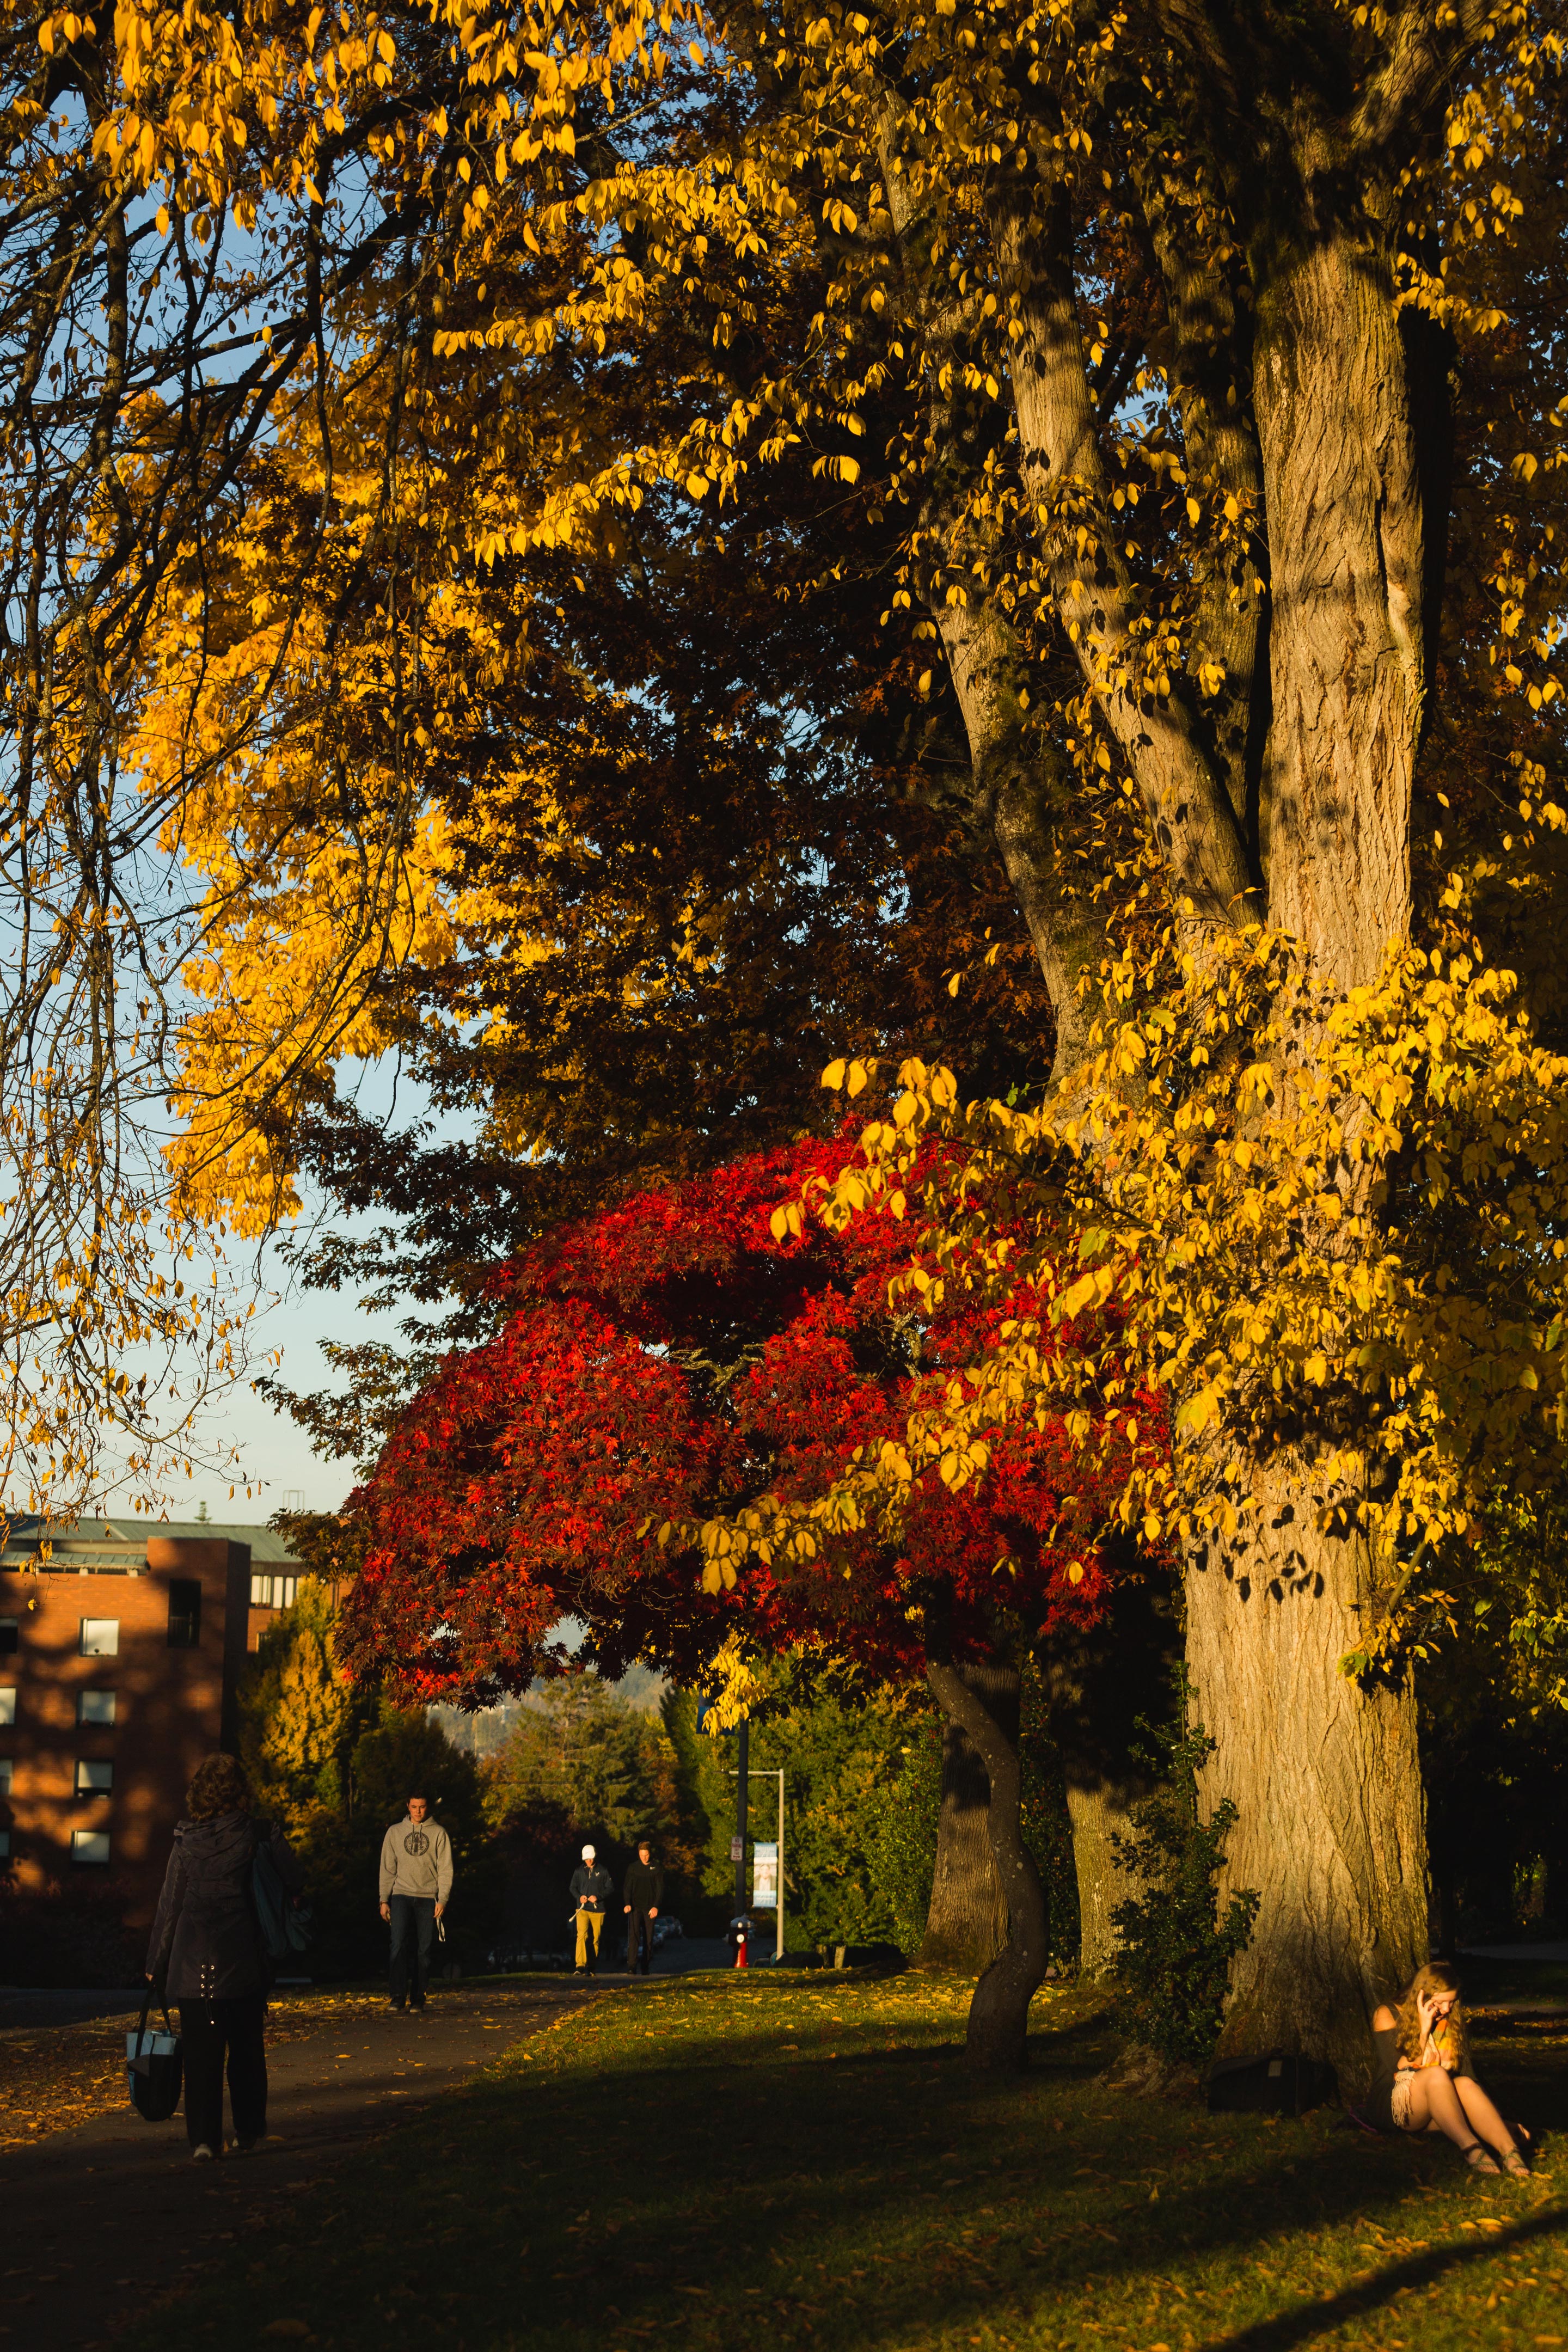 Red and yellow leaves filter the fading fall sunlight on a student sitting against a tree trunk, absorbed in a telephone conversation